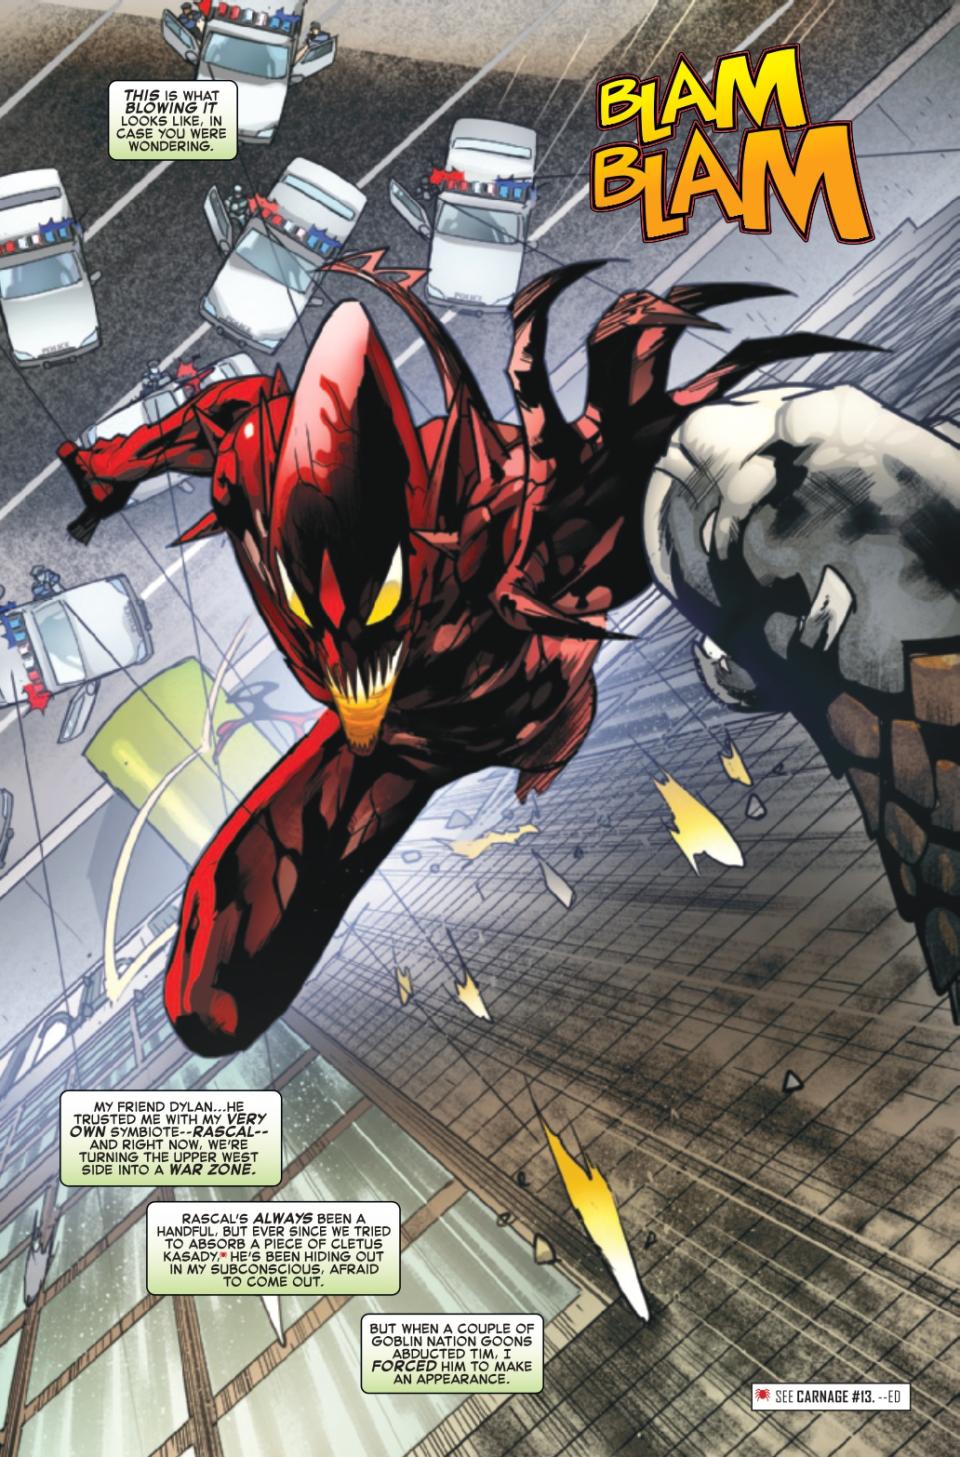 Pages from Red Goblin #7.